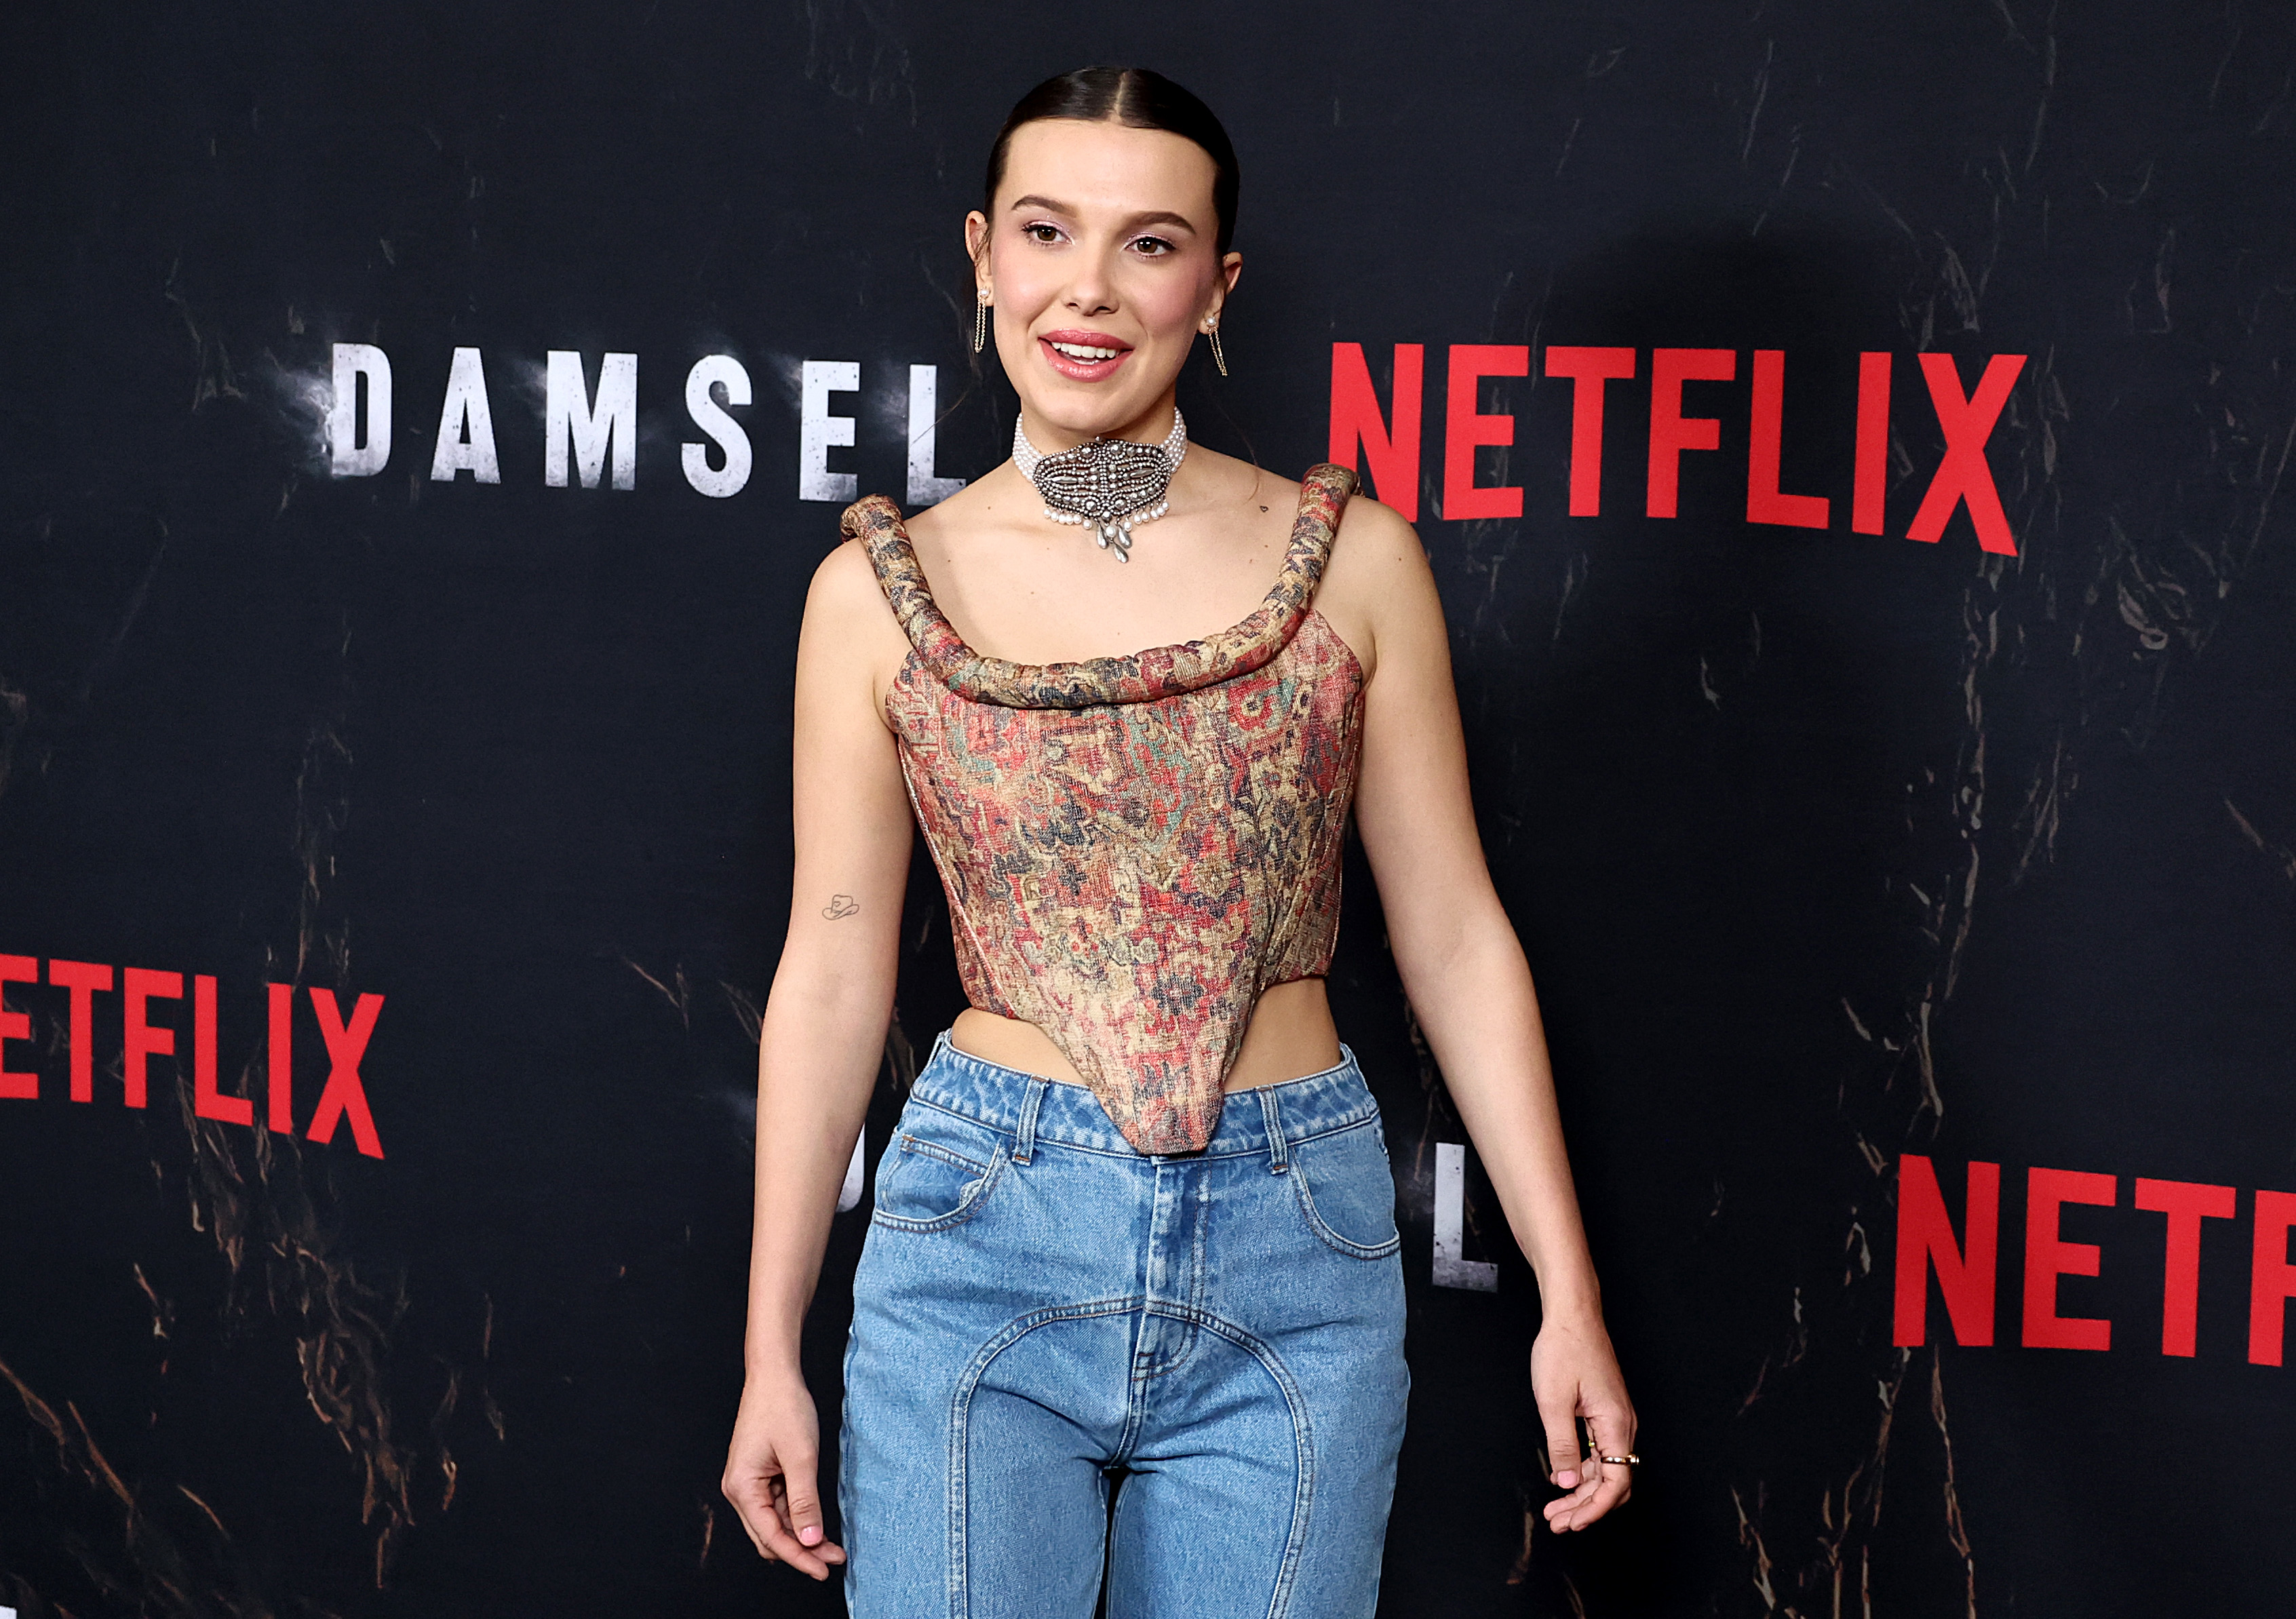 Millie in a patterned corset top and jeans with a statement necklace, posing at a Netflix event